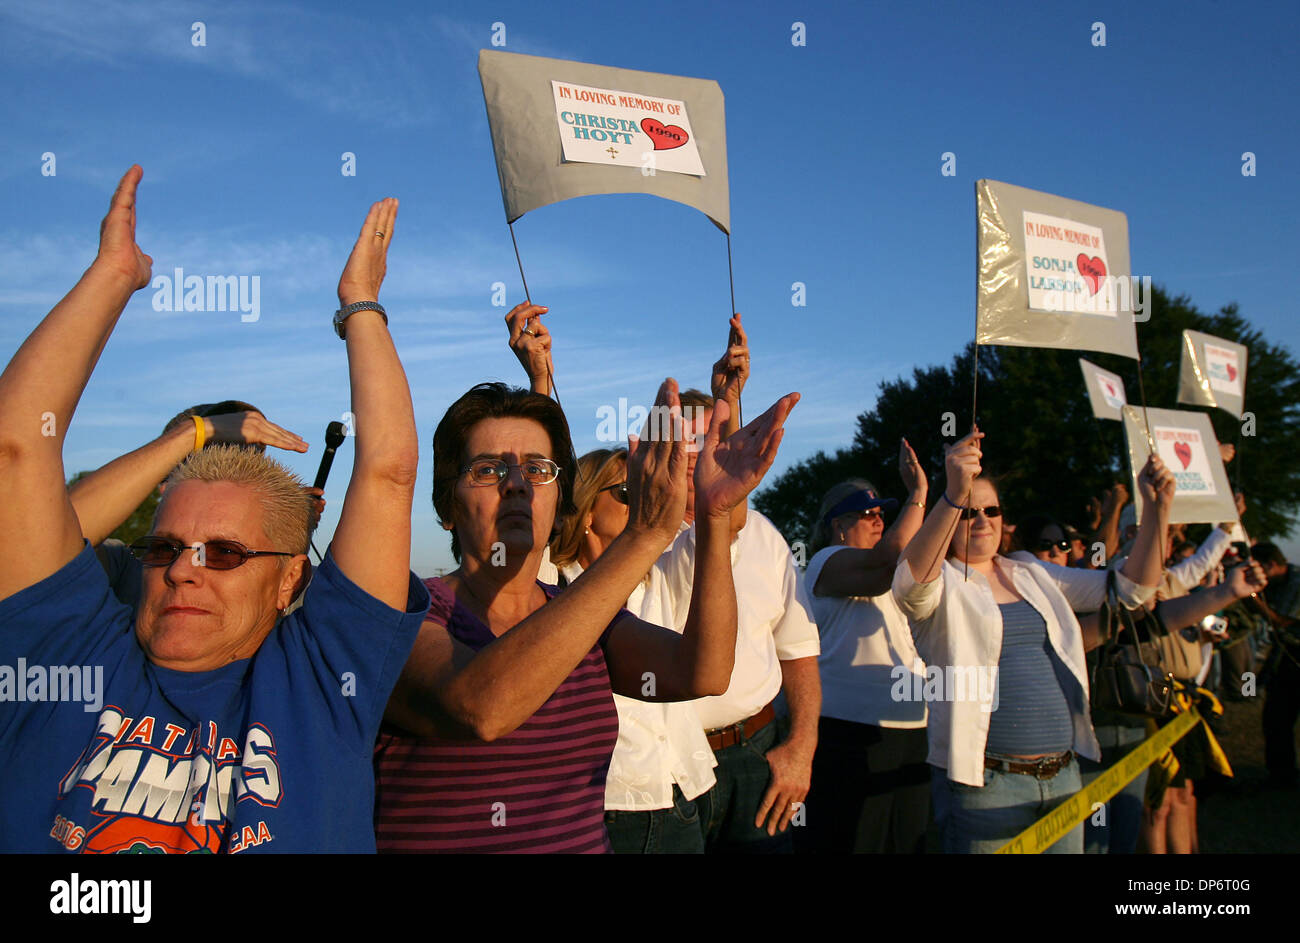 Oct 25, 2006; Starke, FL, USA; Supporters and demonstrators gather outside of the Florida State Prison in Starke, where convicted serial killer Danny Rolling was executed by lethal injection on October 25, 2006.  Rolling was responsible for the slaying of five college students in 1990. Mandatory Credit: Photo by J. Gwendolynne Berry/Palm Beach Post/ZUMA Press. (©) Copyright 2006 by Stock Photo